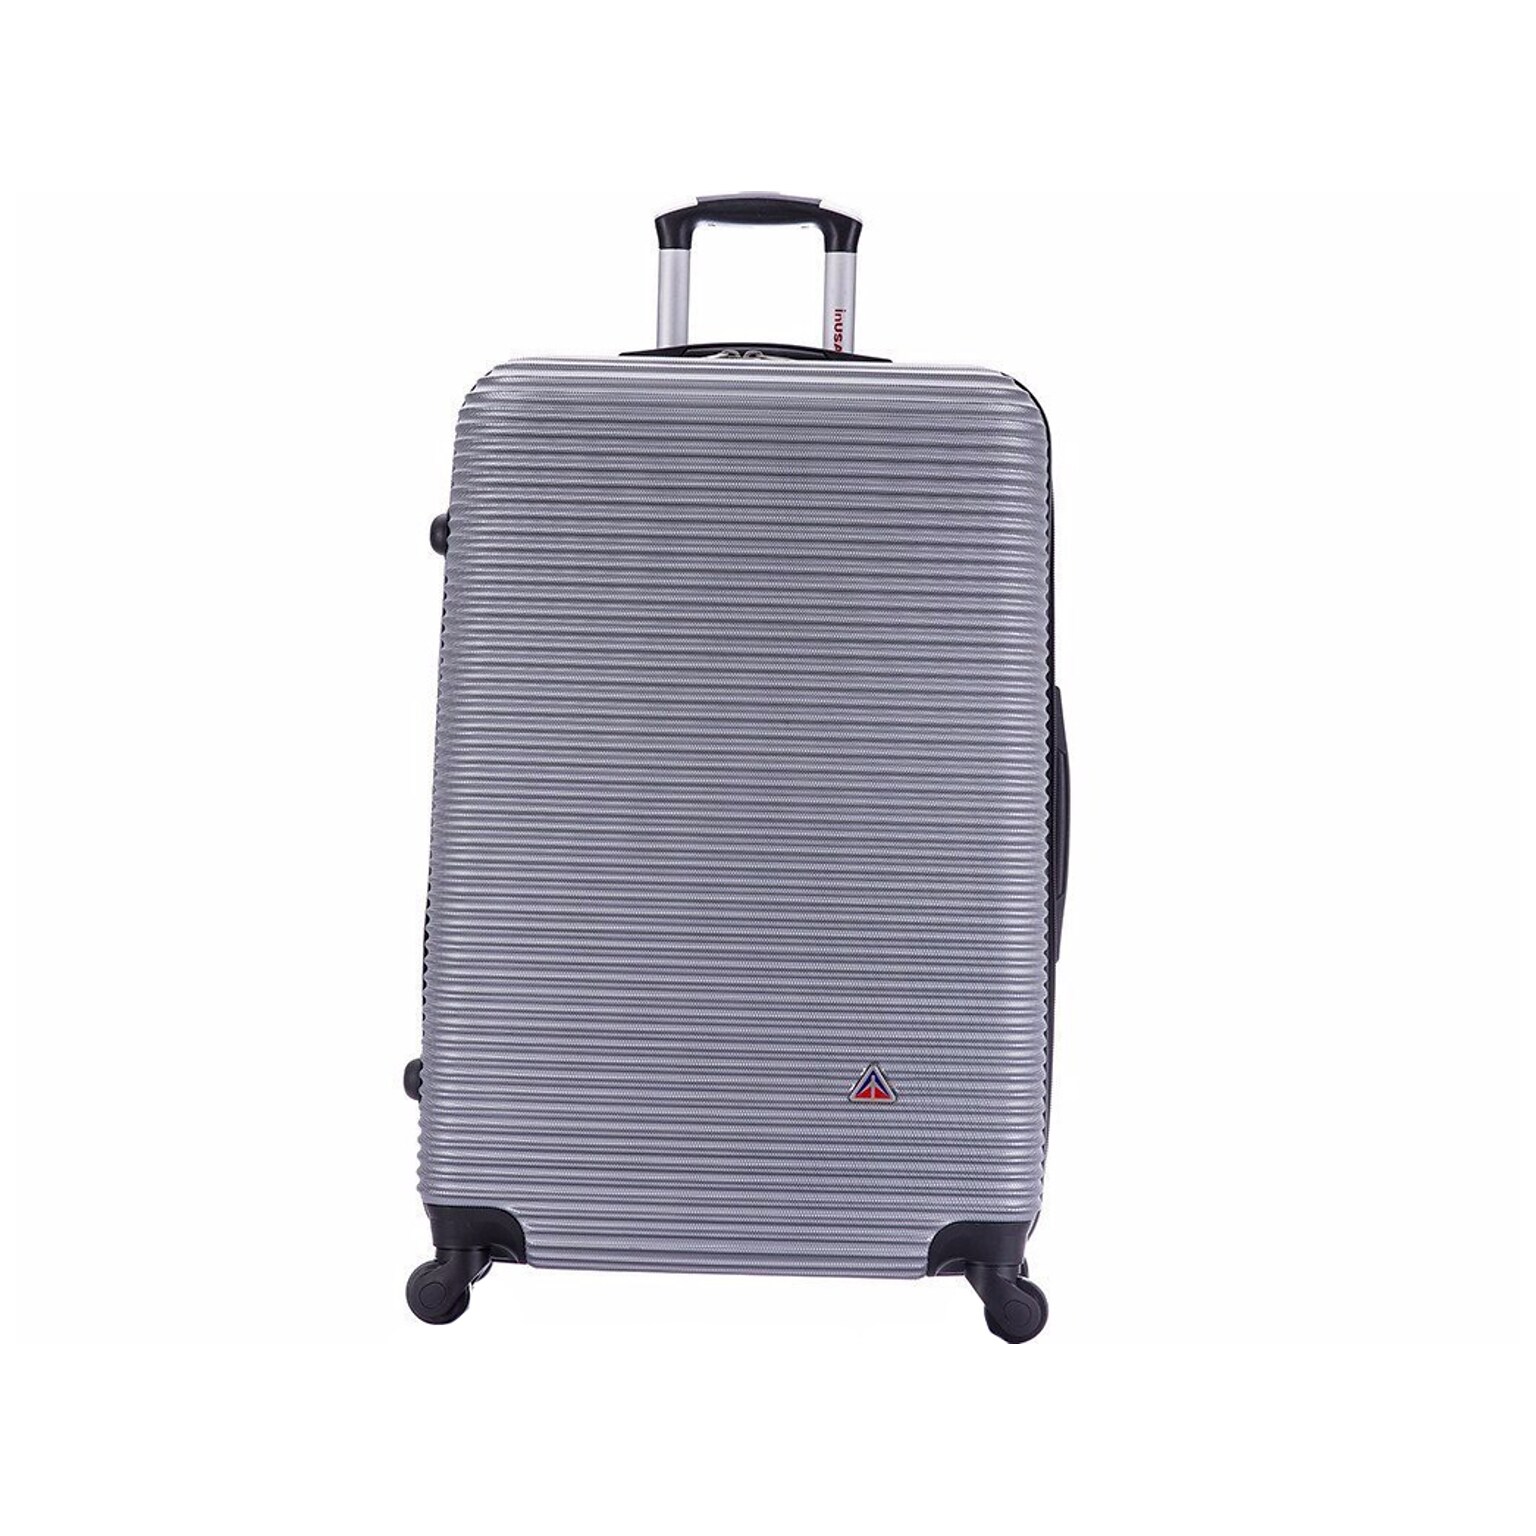 InUSA Royal 30 Hardside Suitcase, 4-Wheeled Spinner, Silver (IUROY00L-SIL)